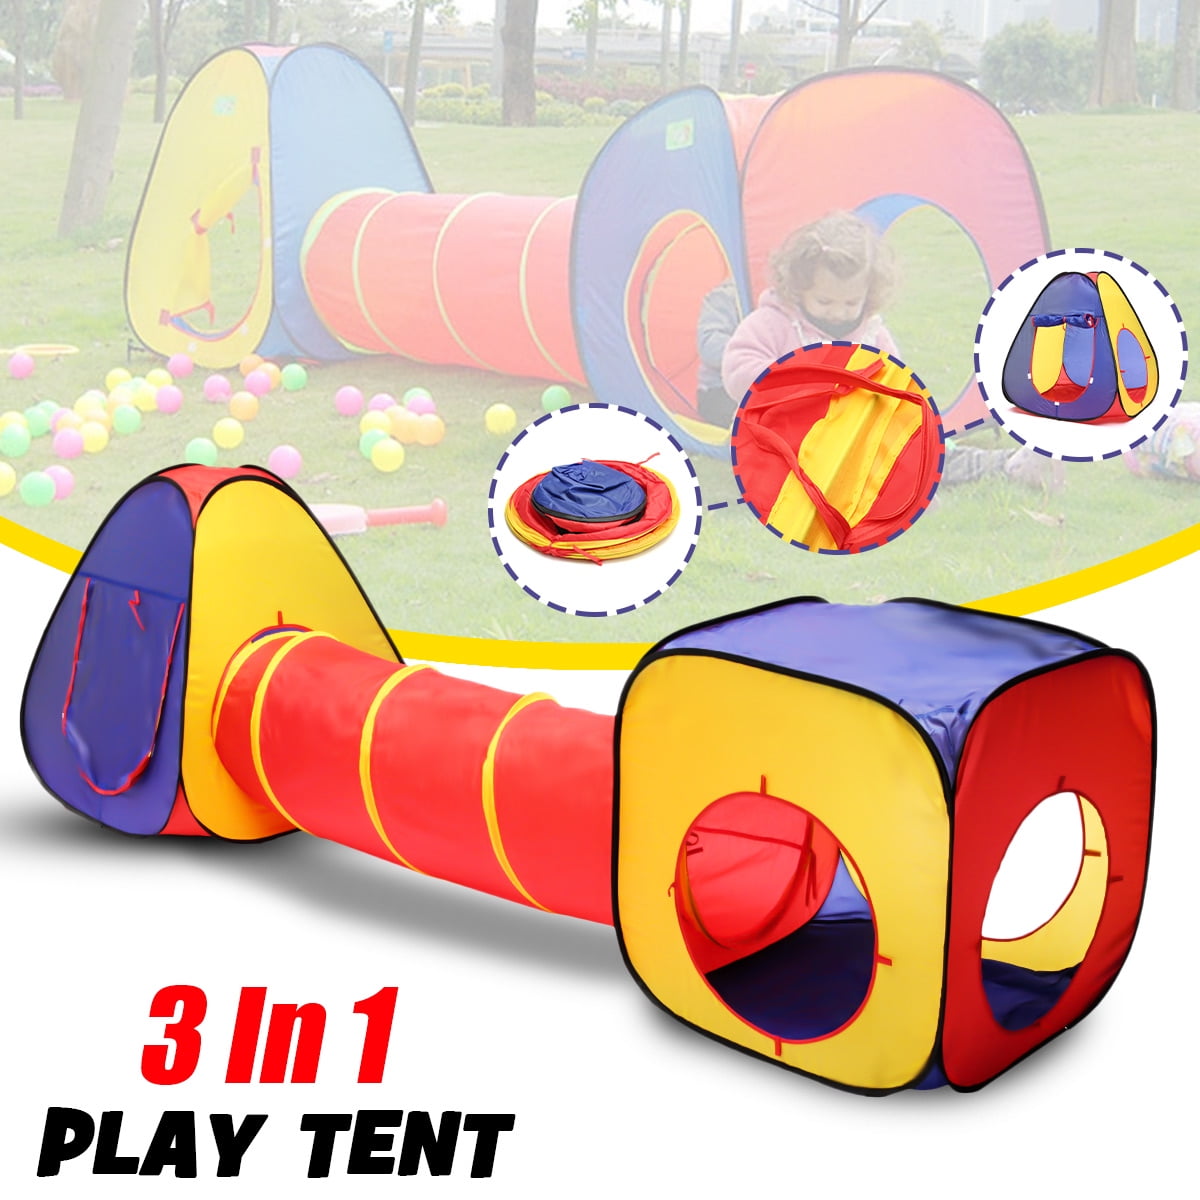 Folding Toddler Kids Play Tent Crawl Tunnel Indoor Outdoor Playhouse Play Toys 